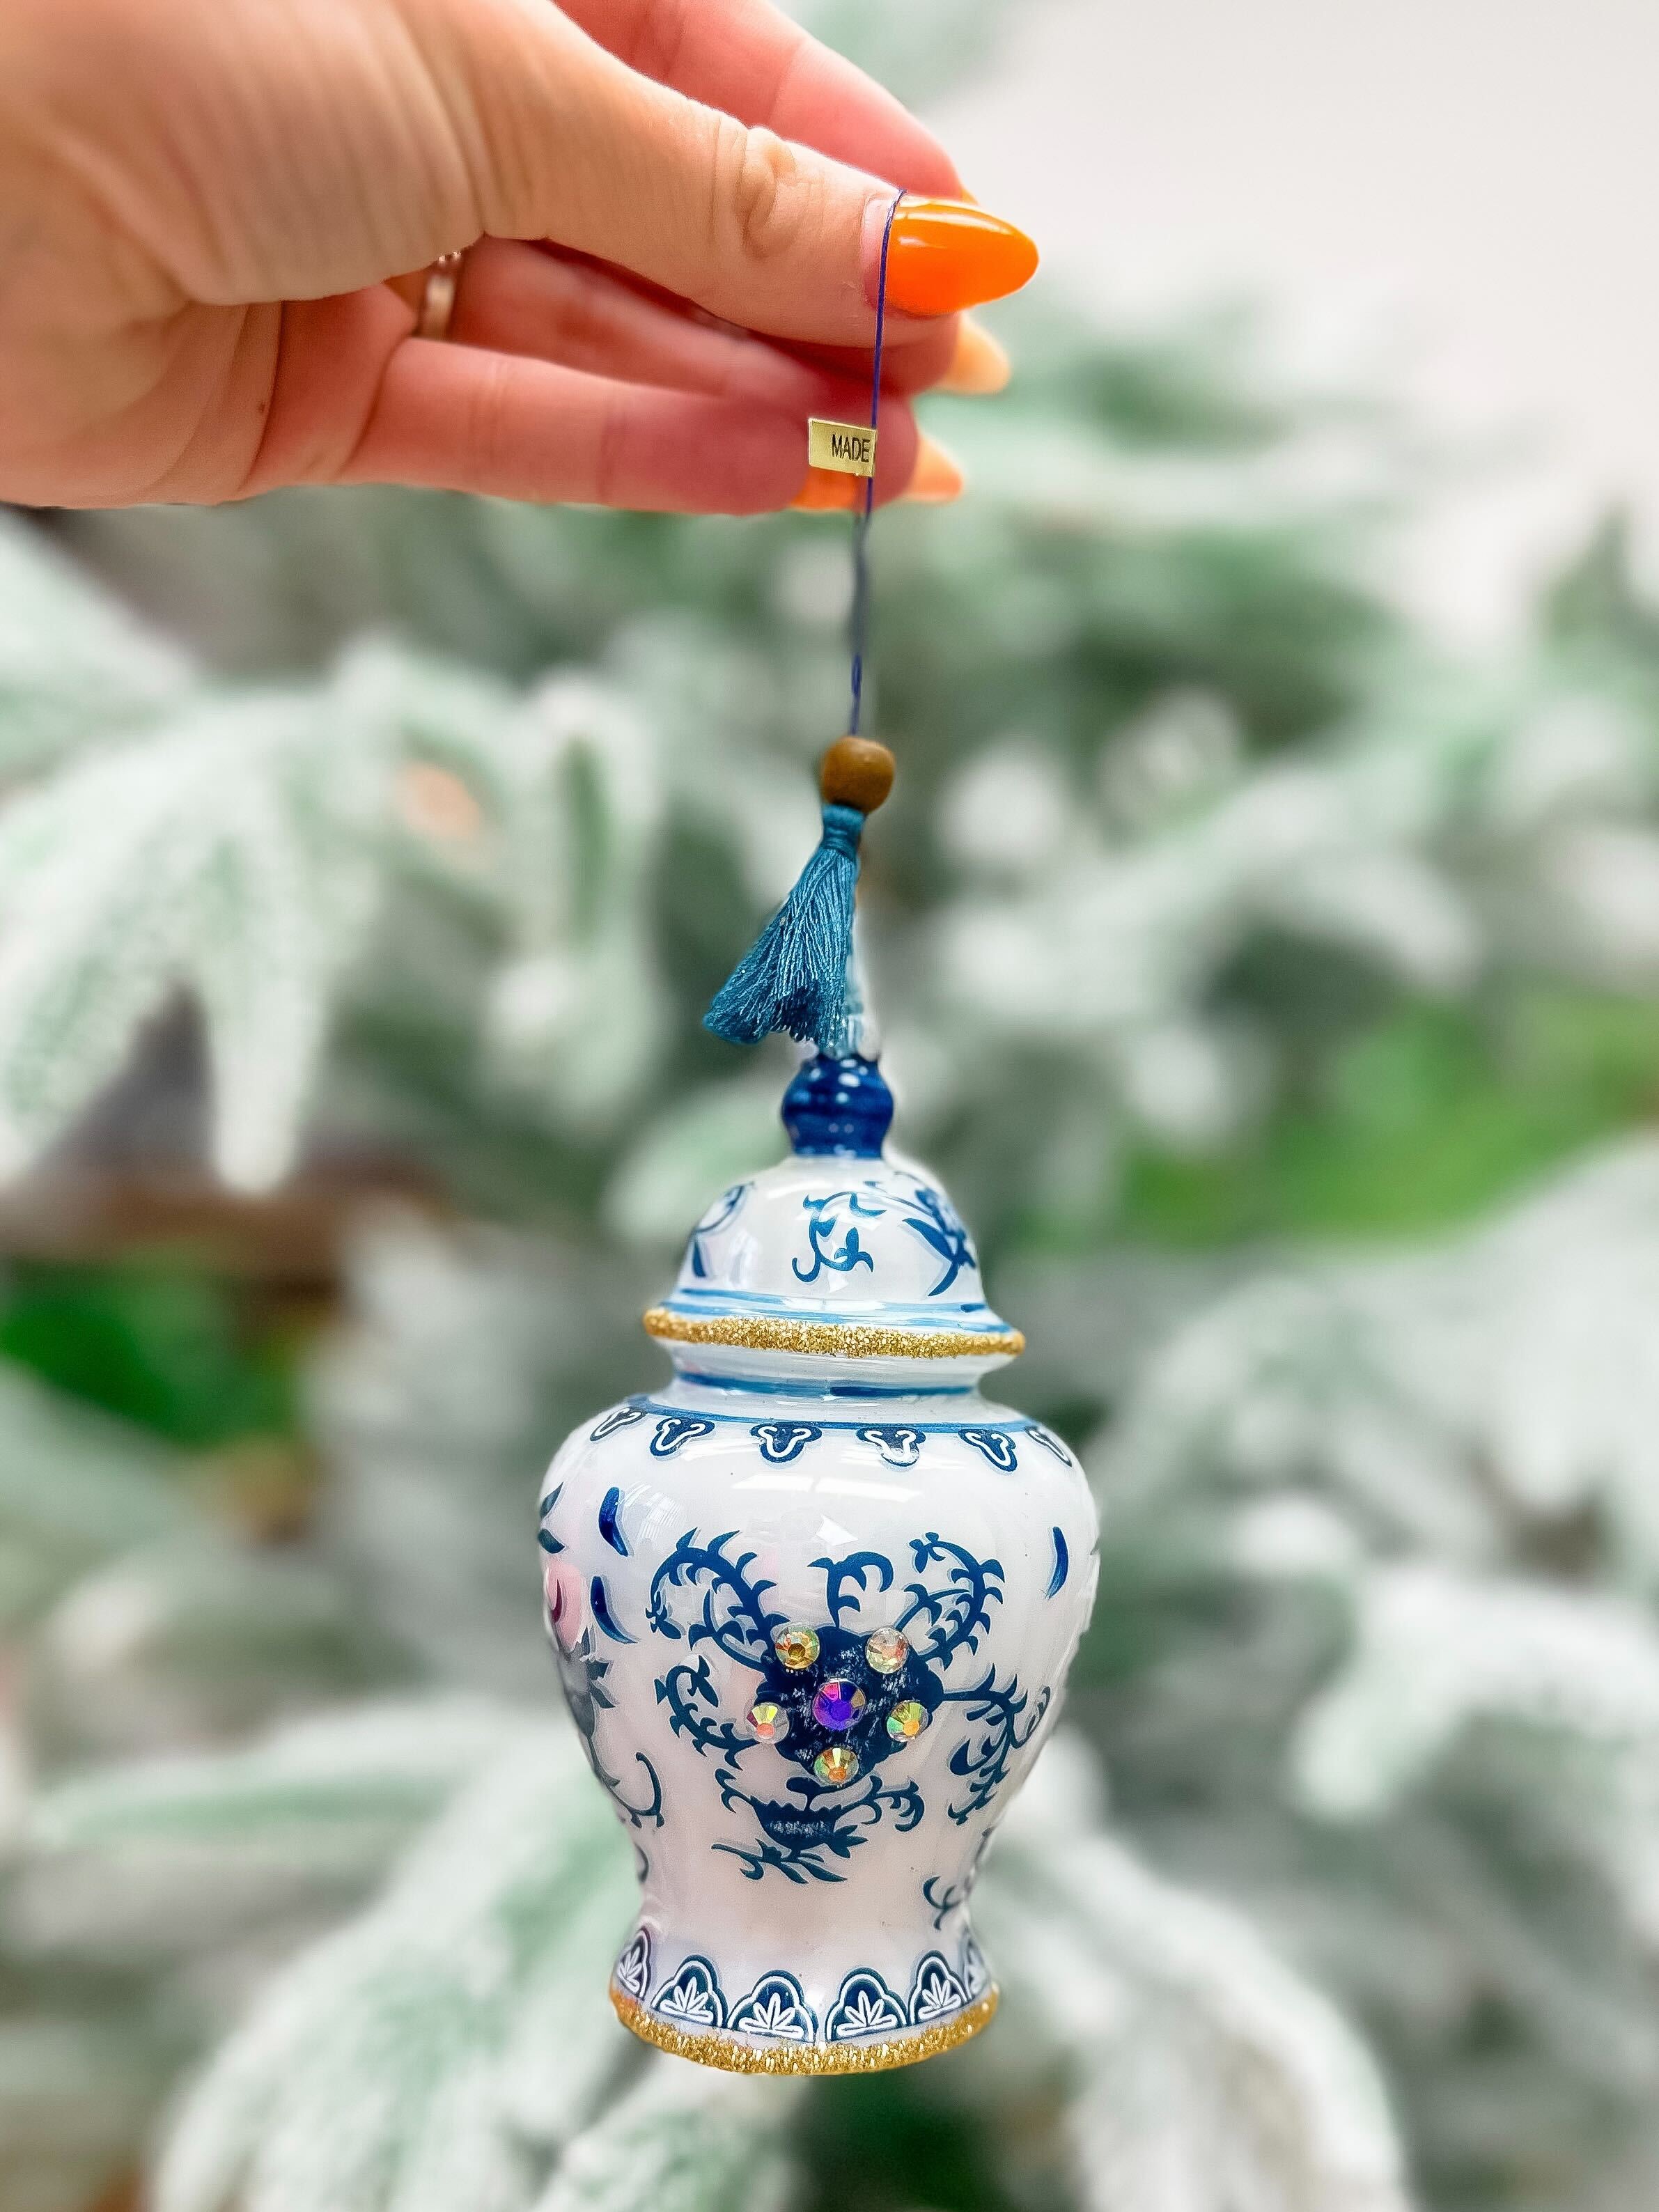 Chinoiserie Ginger Jar Ornament - Choice of Style